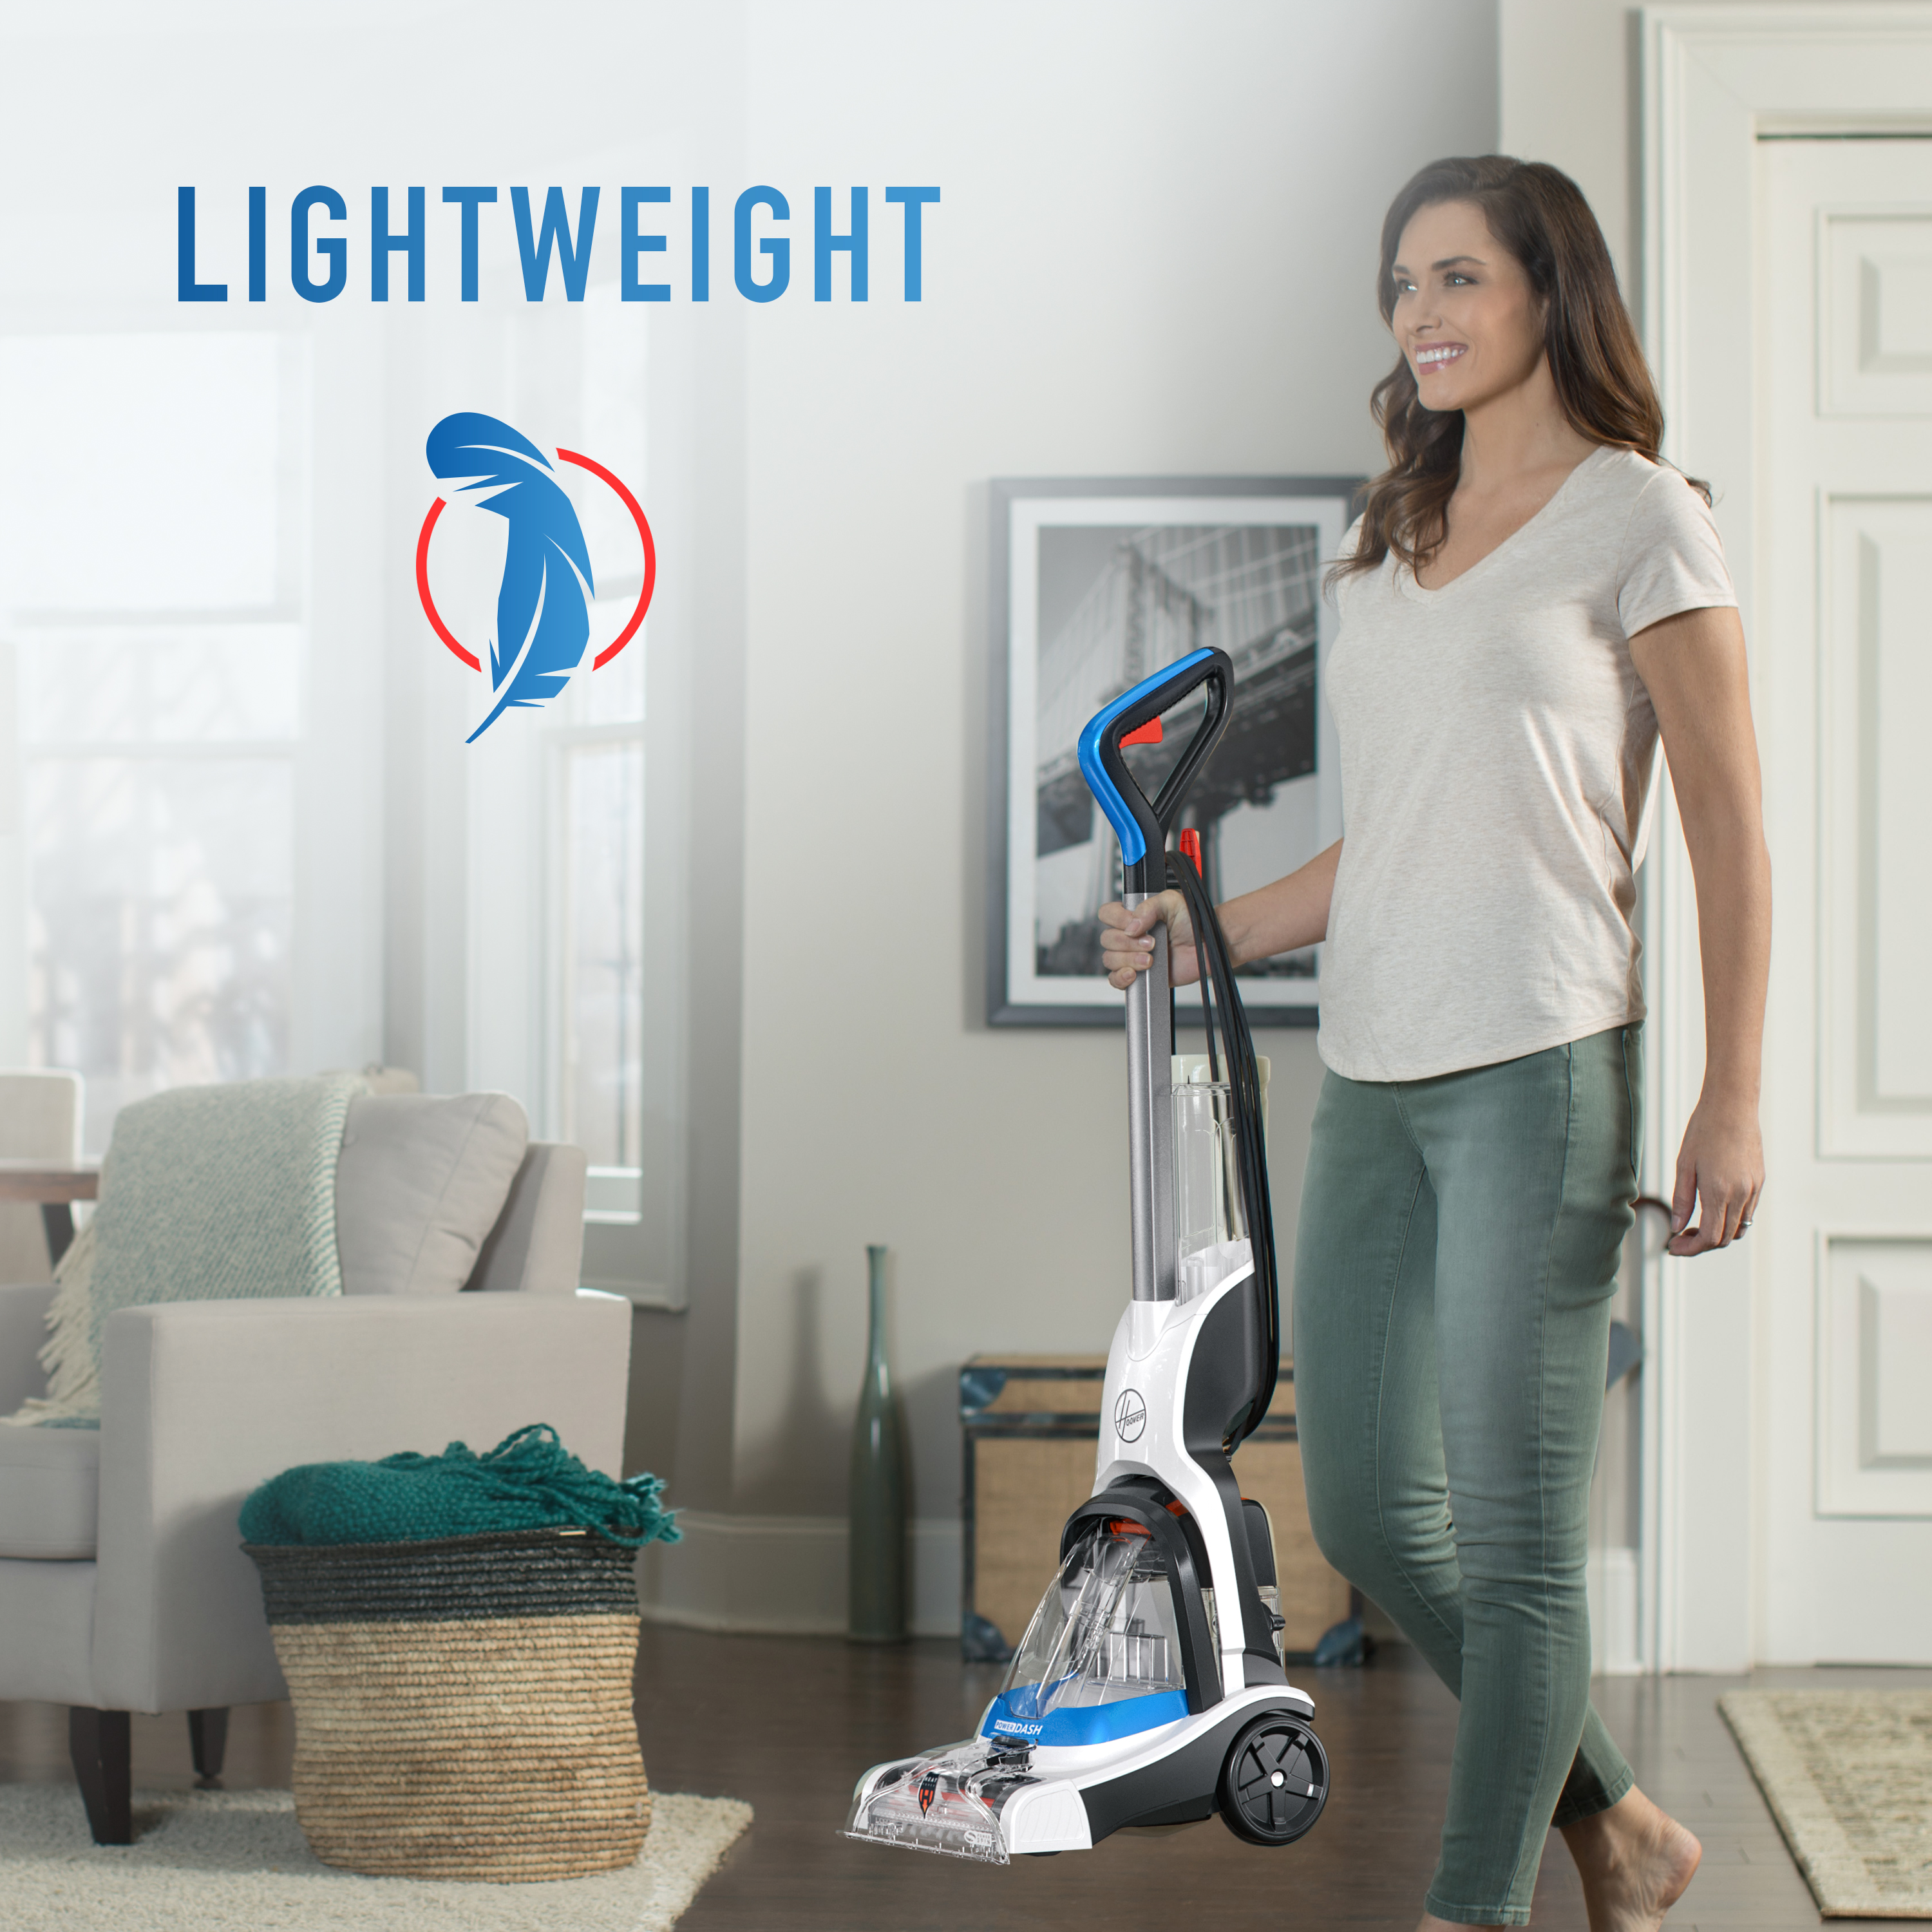 Hoover PowerDash Pet, Upright Carpet Cleaner Machine with Clean Pack Carpet Cleaner Solution Pod Samples, FH50712 - image 8 of 17